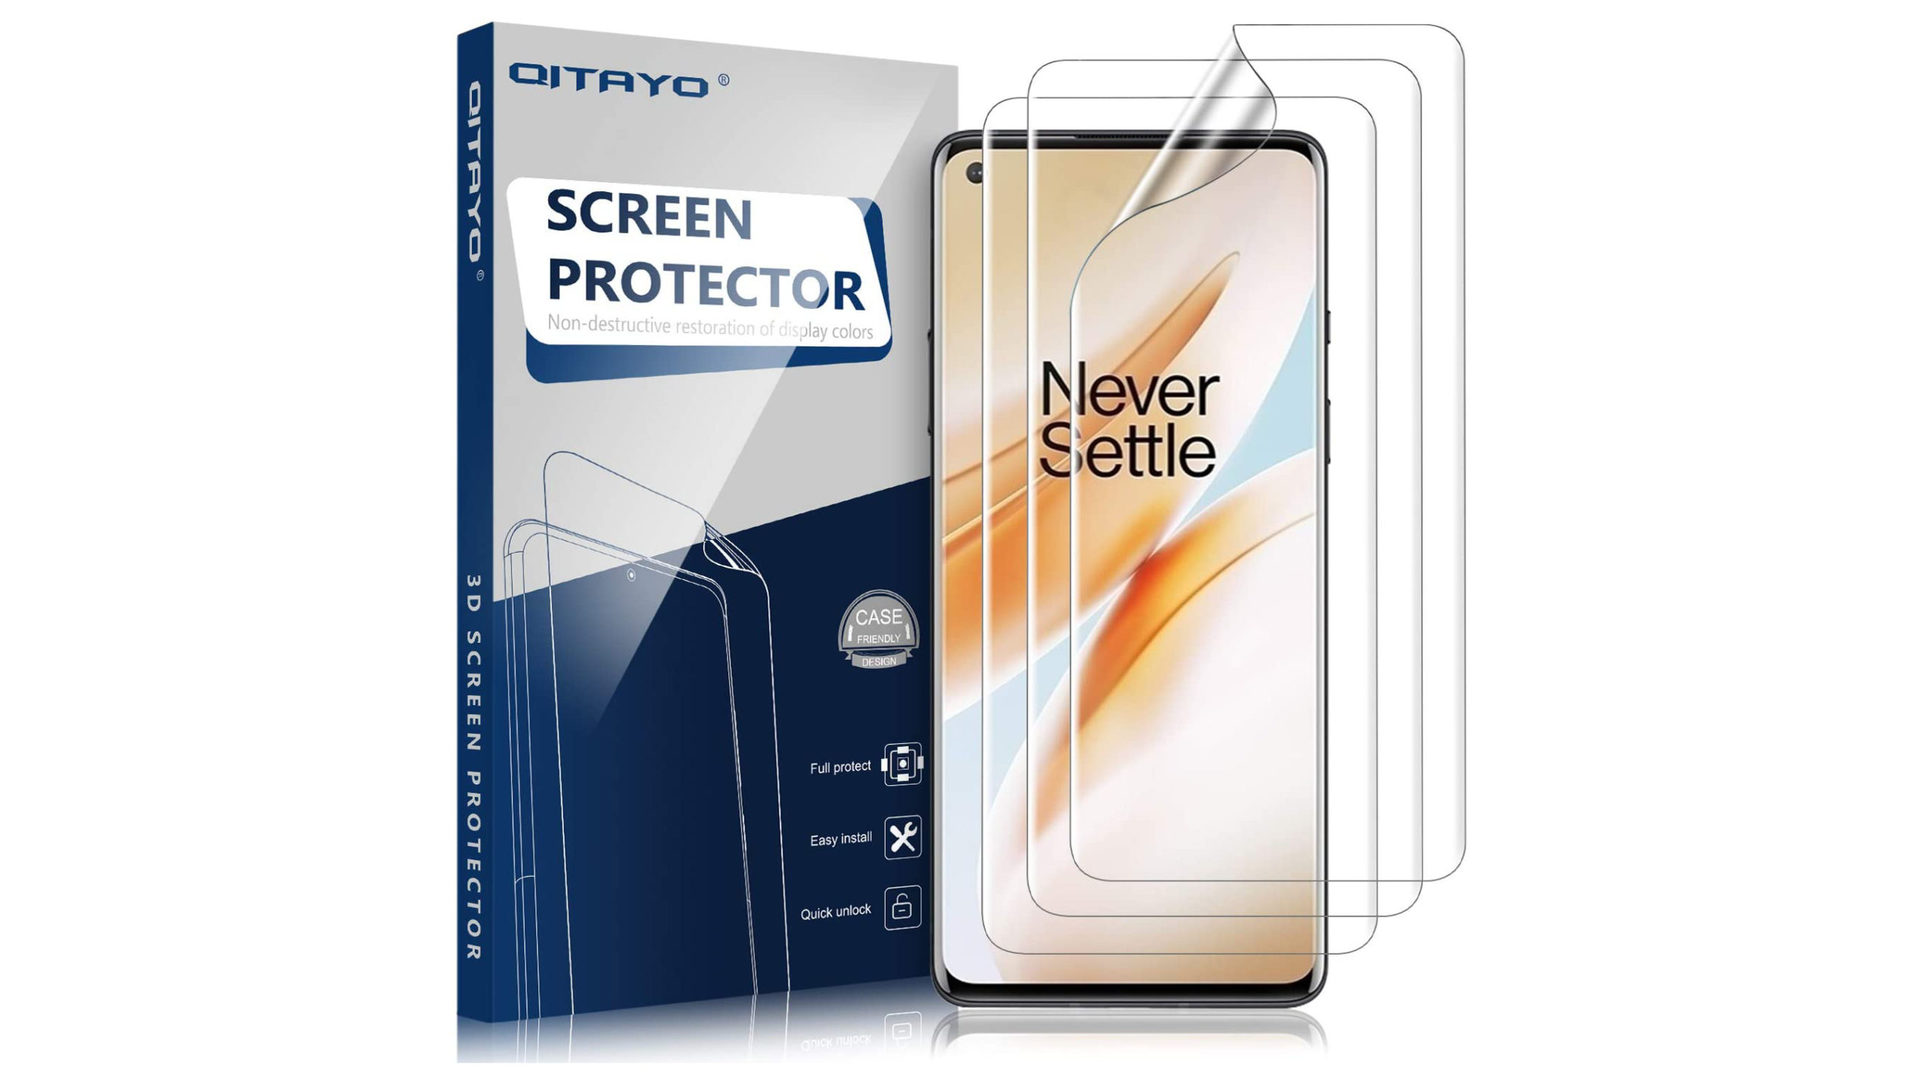 QITAYO Screen Protector for OnePlus 8